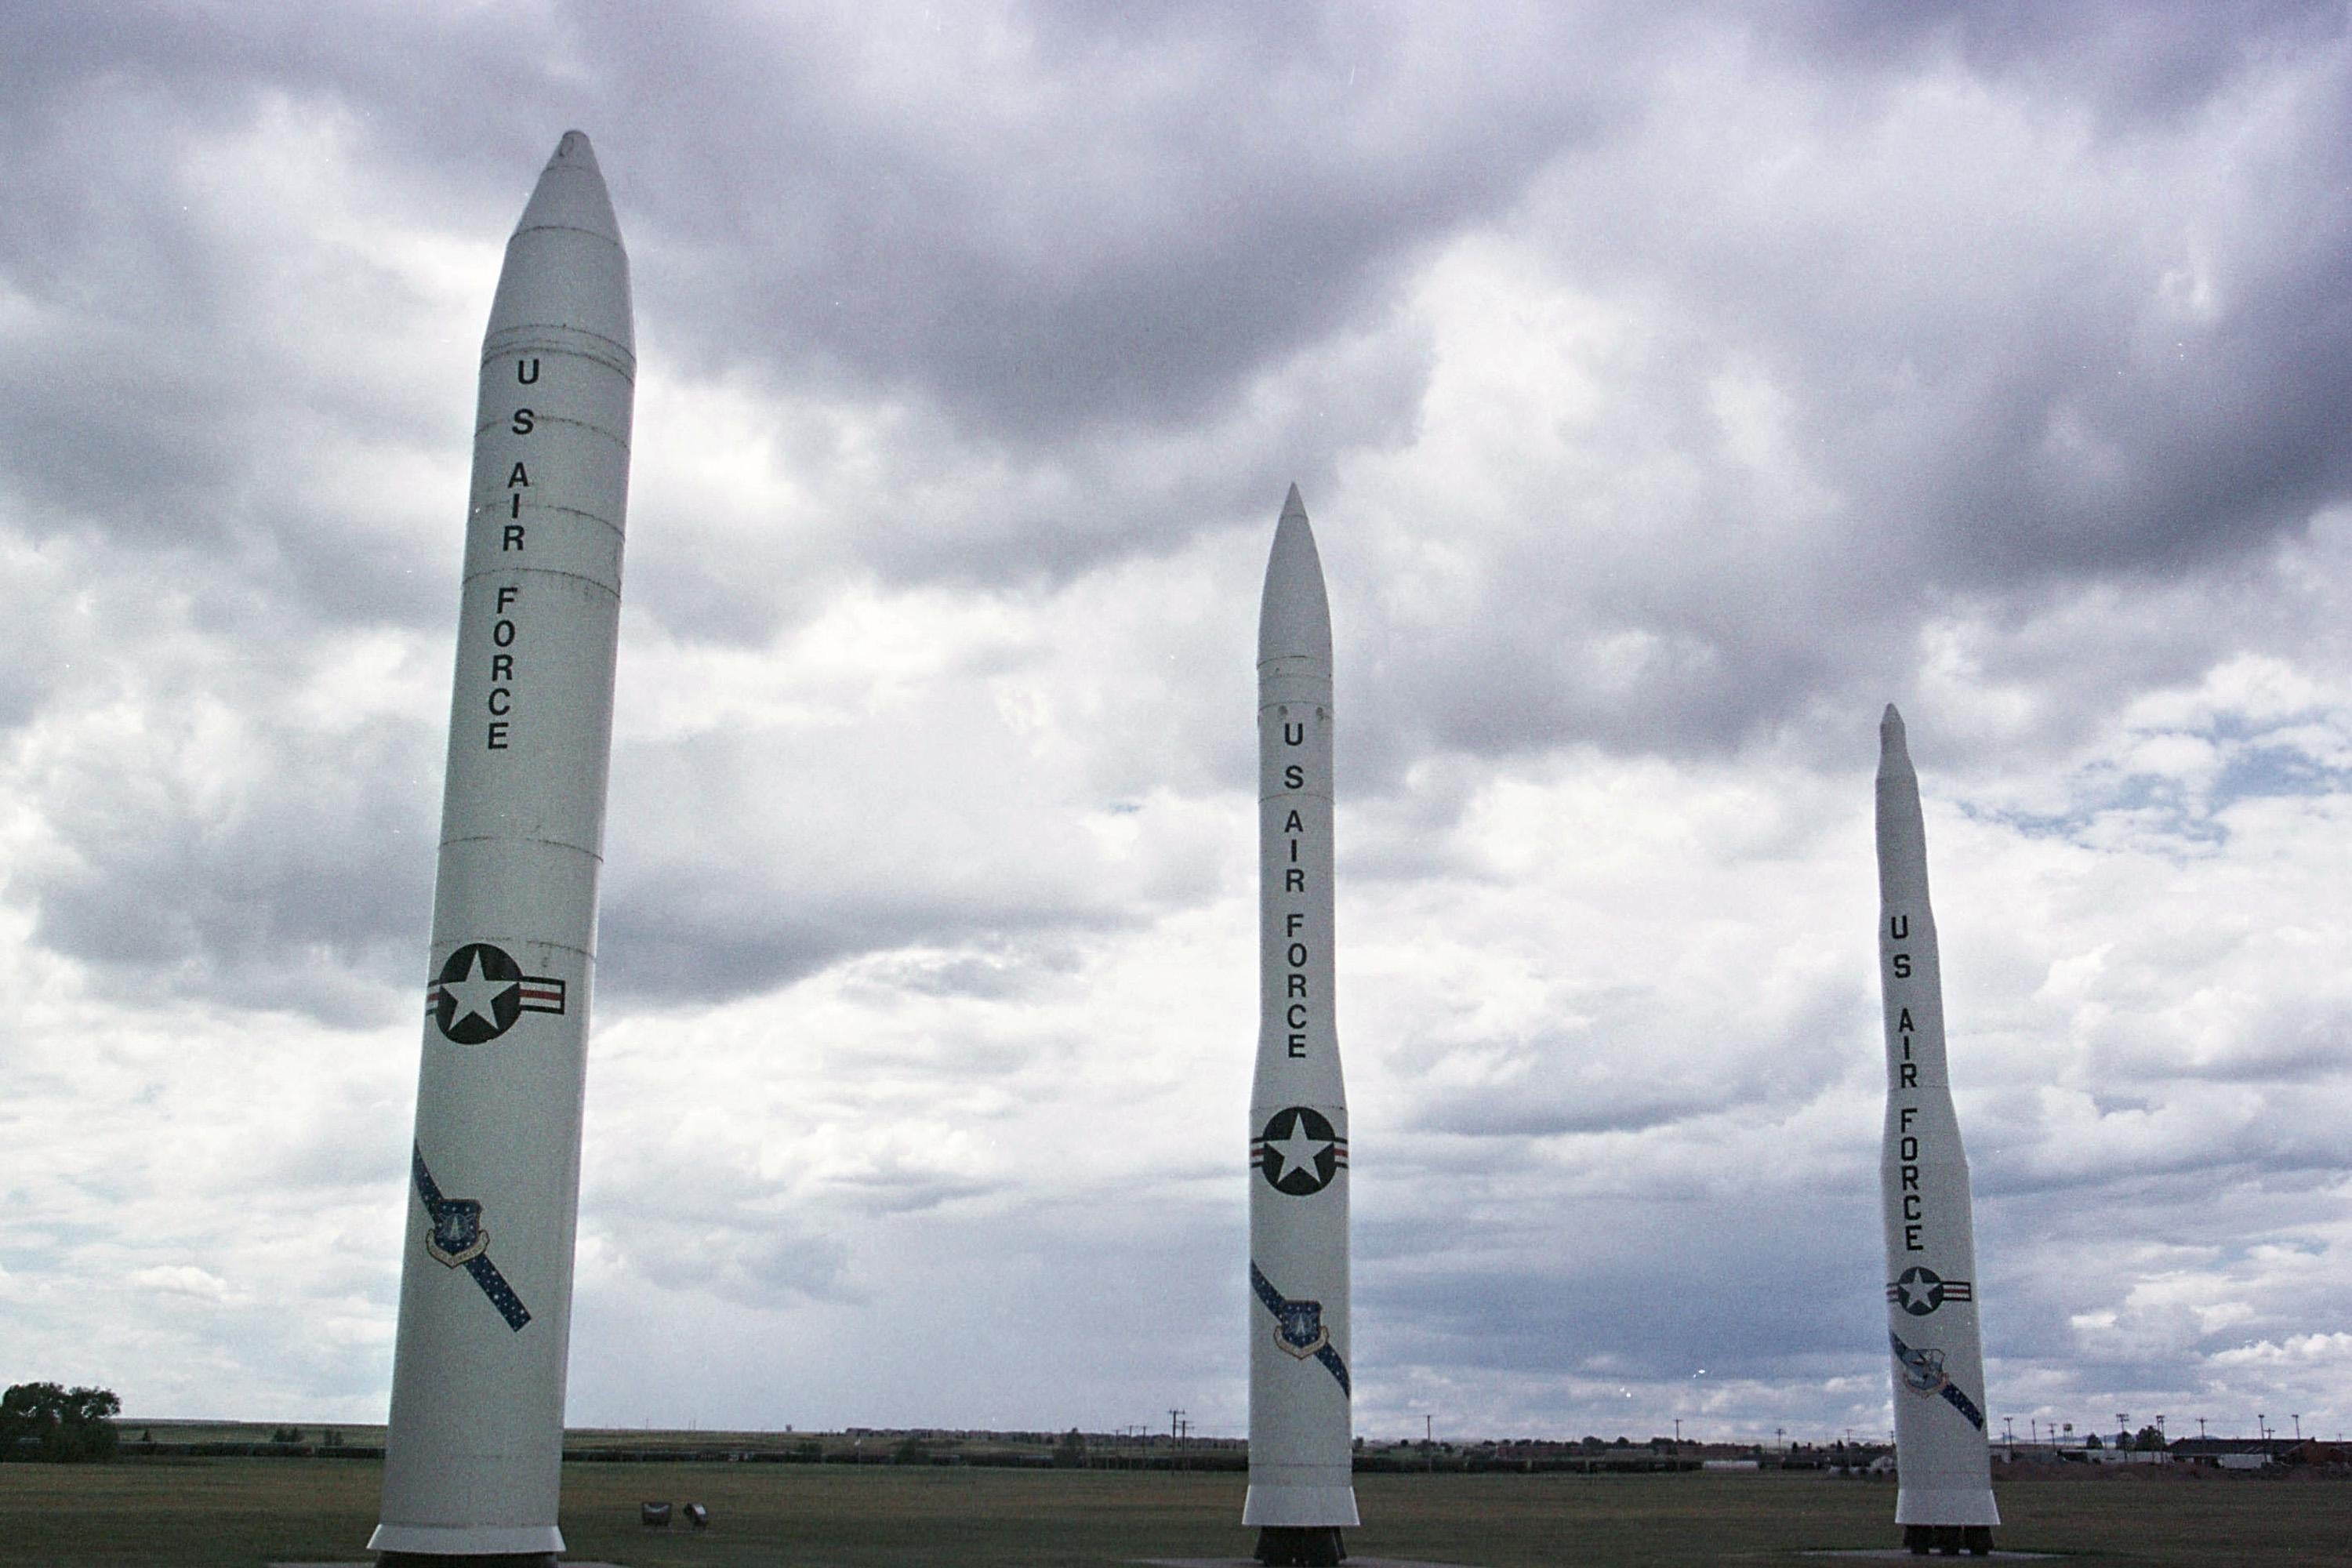 391774 02: A MX or "Peacekeeper" missile, left, and two versions of the Minuteman missile sit at the entrance of Warren Air Force base July 11, 2001 near Cheyenne, WY. Defense Secretary Donald Rumsfeld announced plans to scrap all 50 of the nuclear-tipped missiles located on the base. (Photo by Michael Smith/Getty Images)